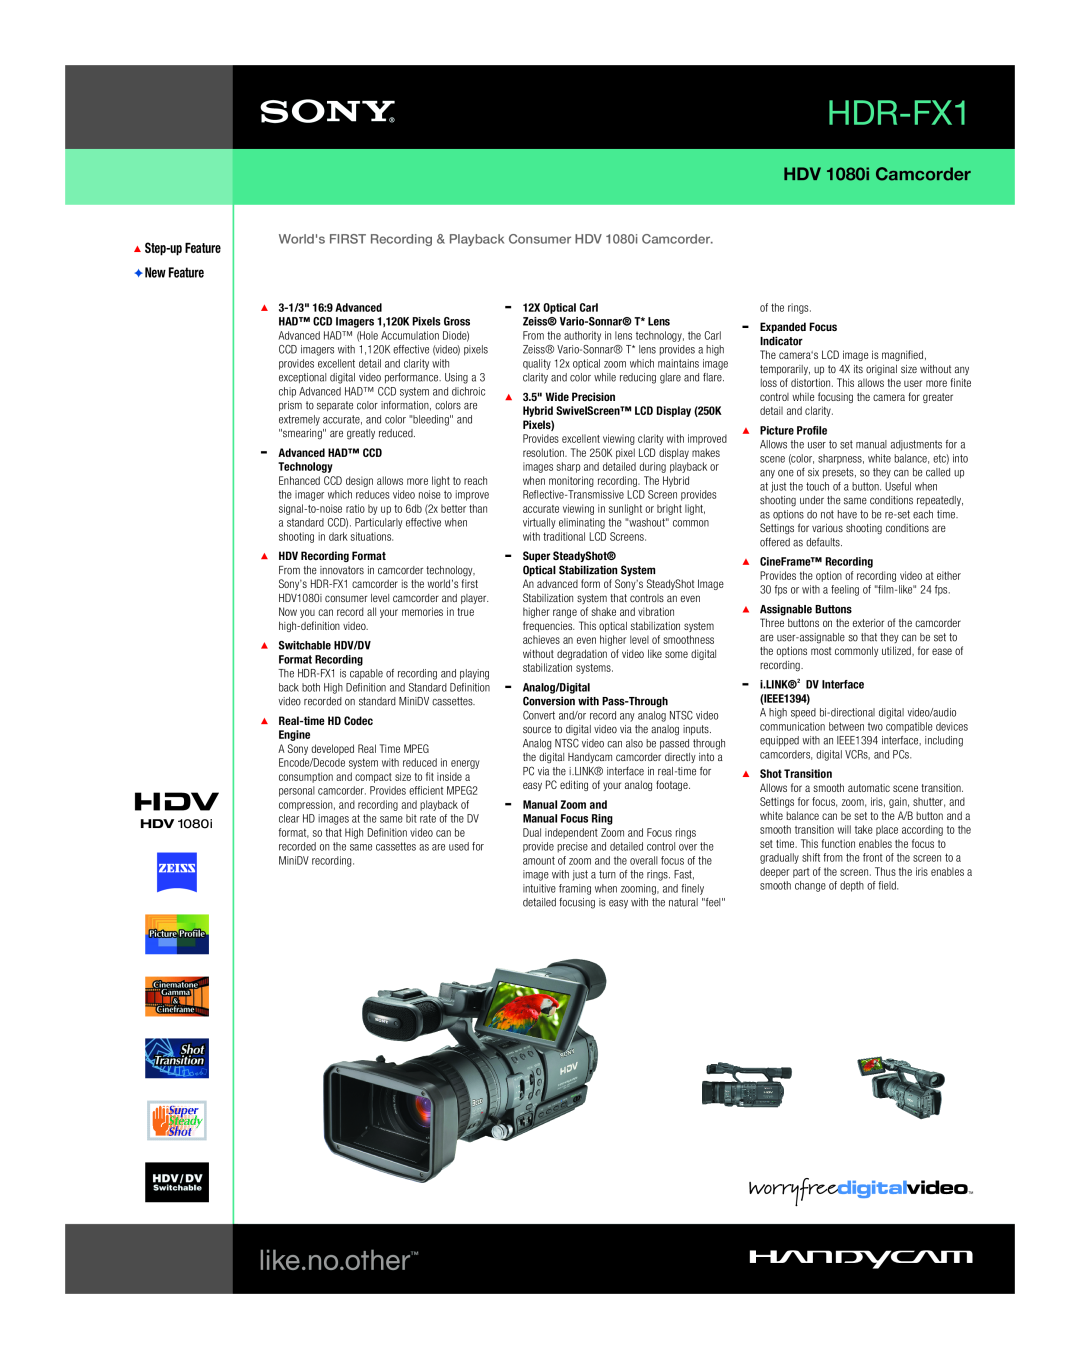 Sony HDR-FX1 manual HDV 1080i Camcorder, Step-up Feature New Feature 